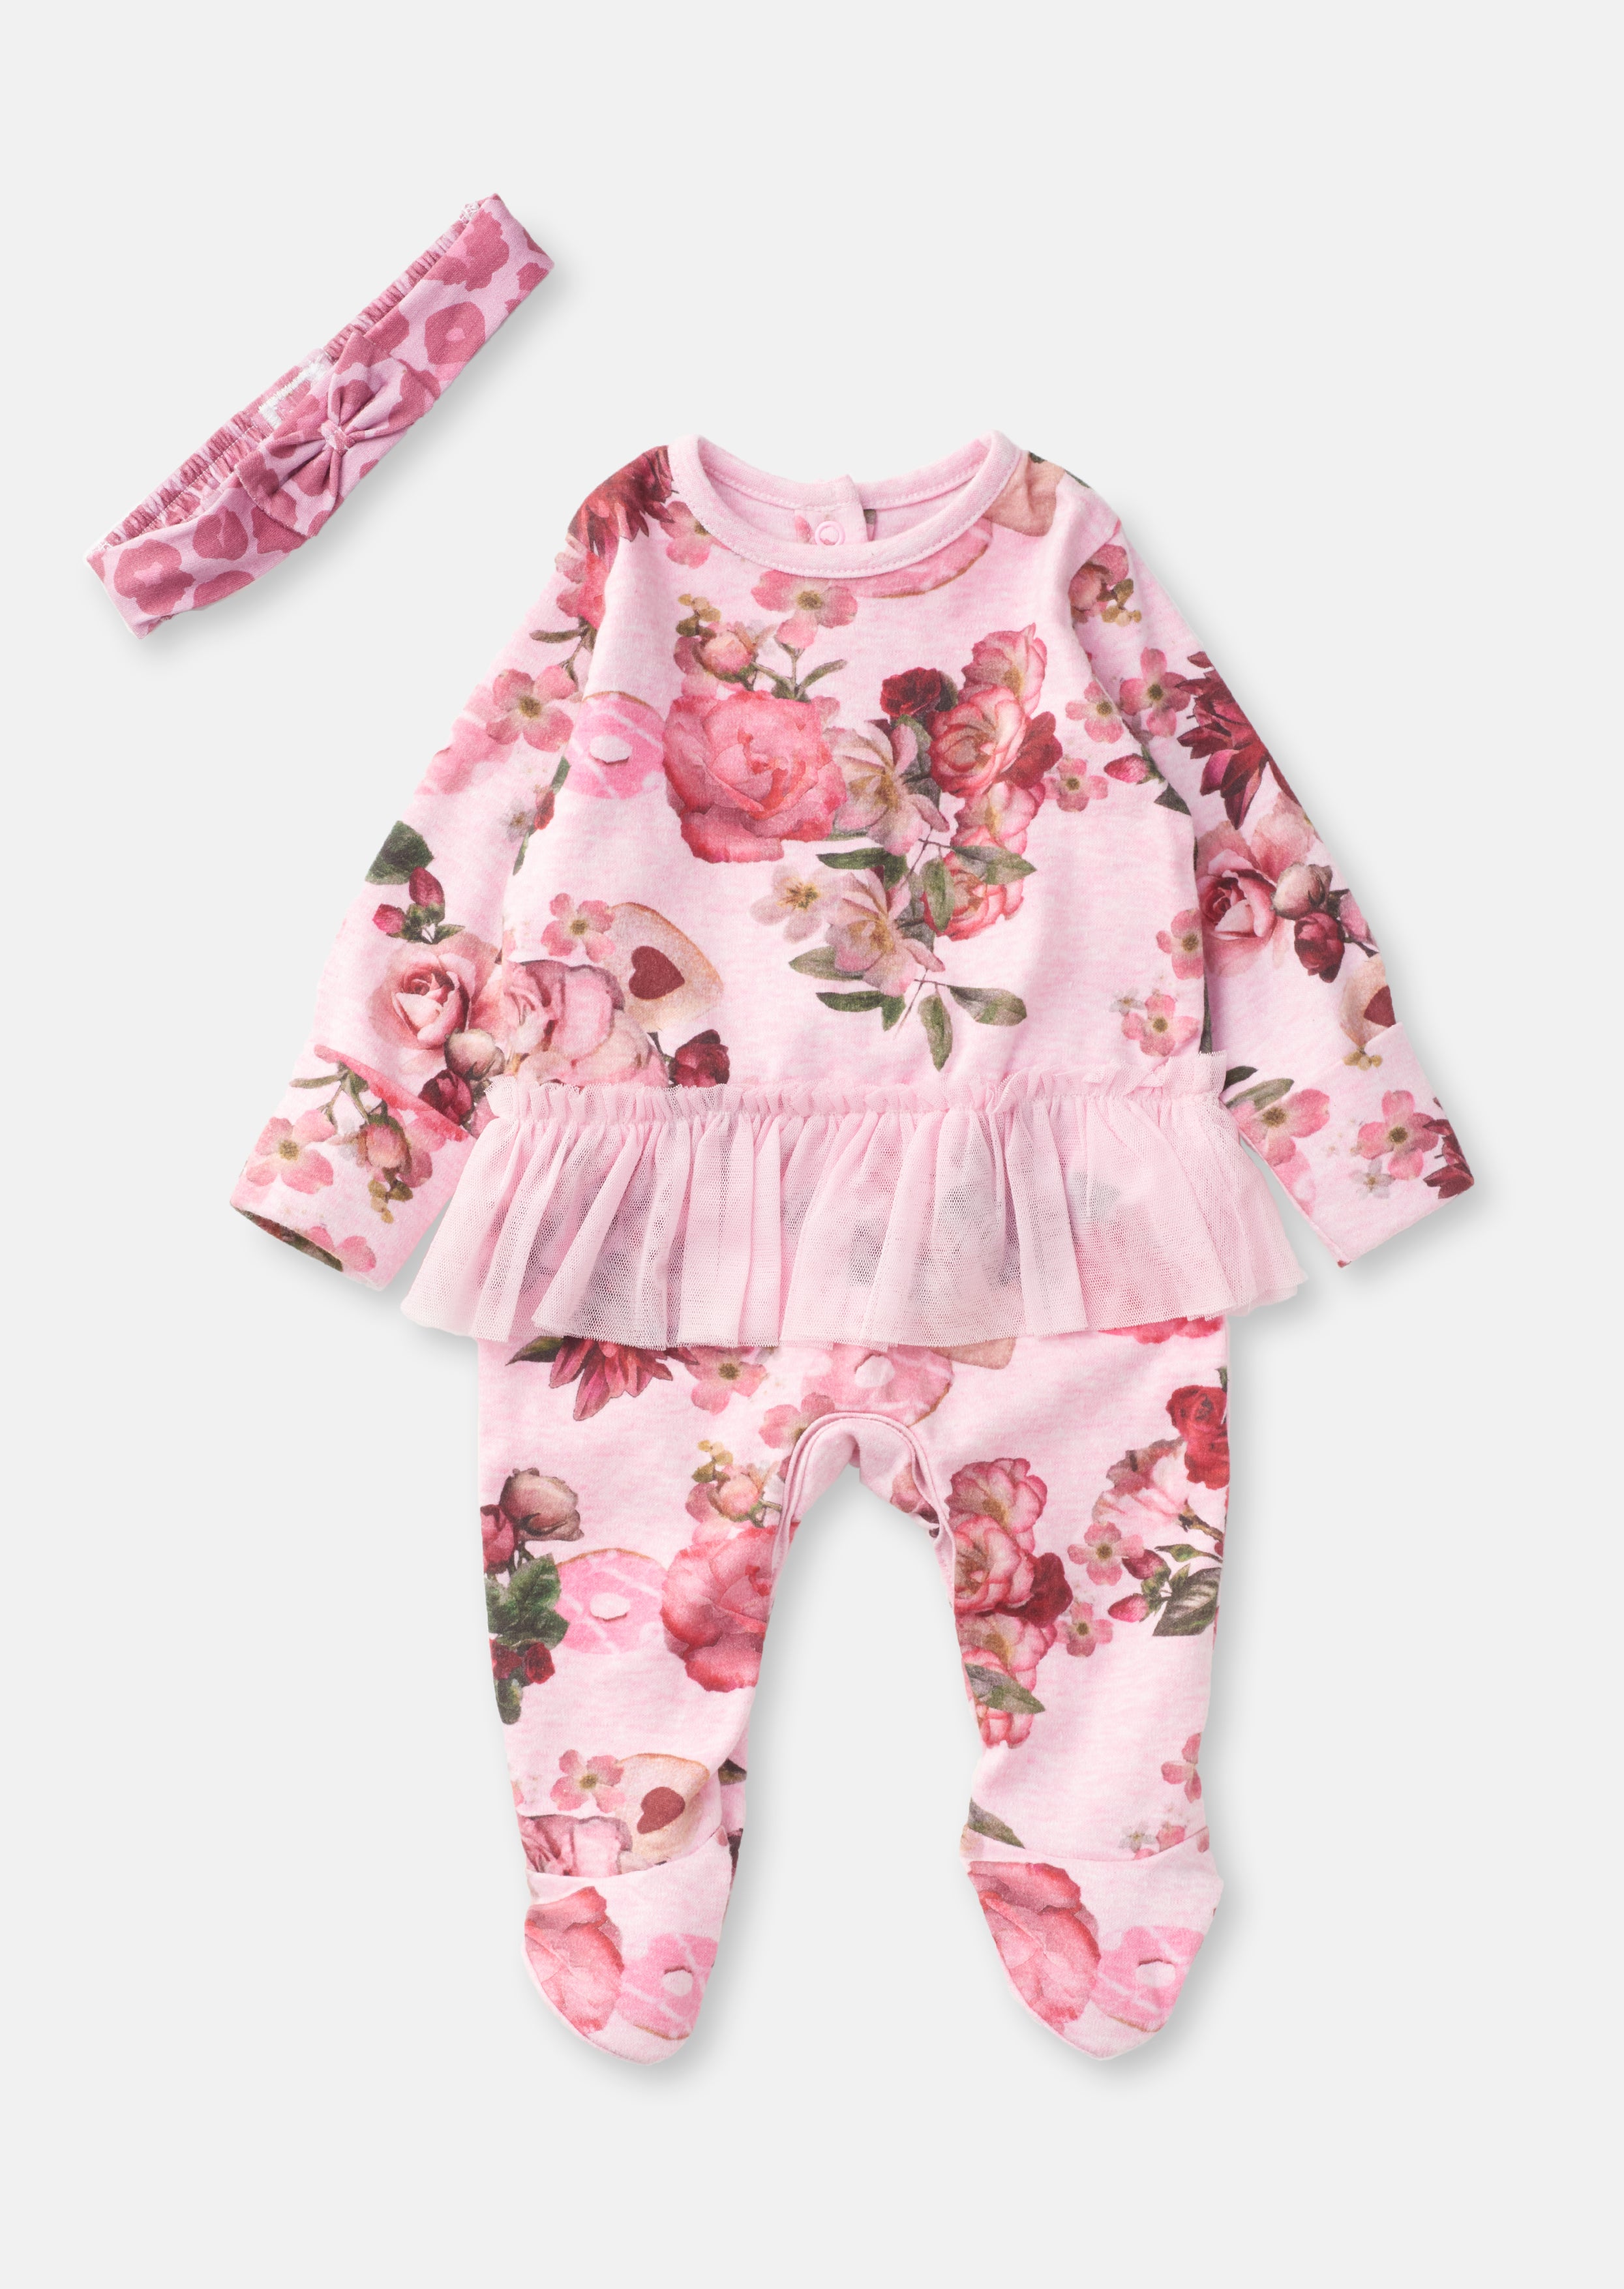 Baby Girl Animal and Floral Printed All in One Pink Sleepsuit